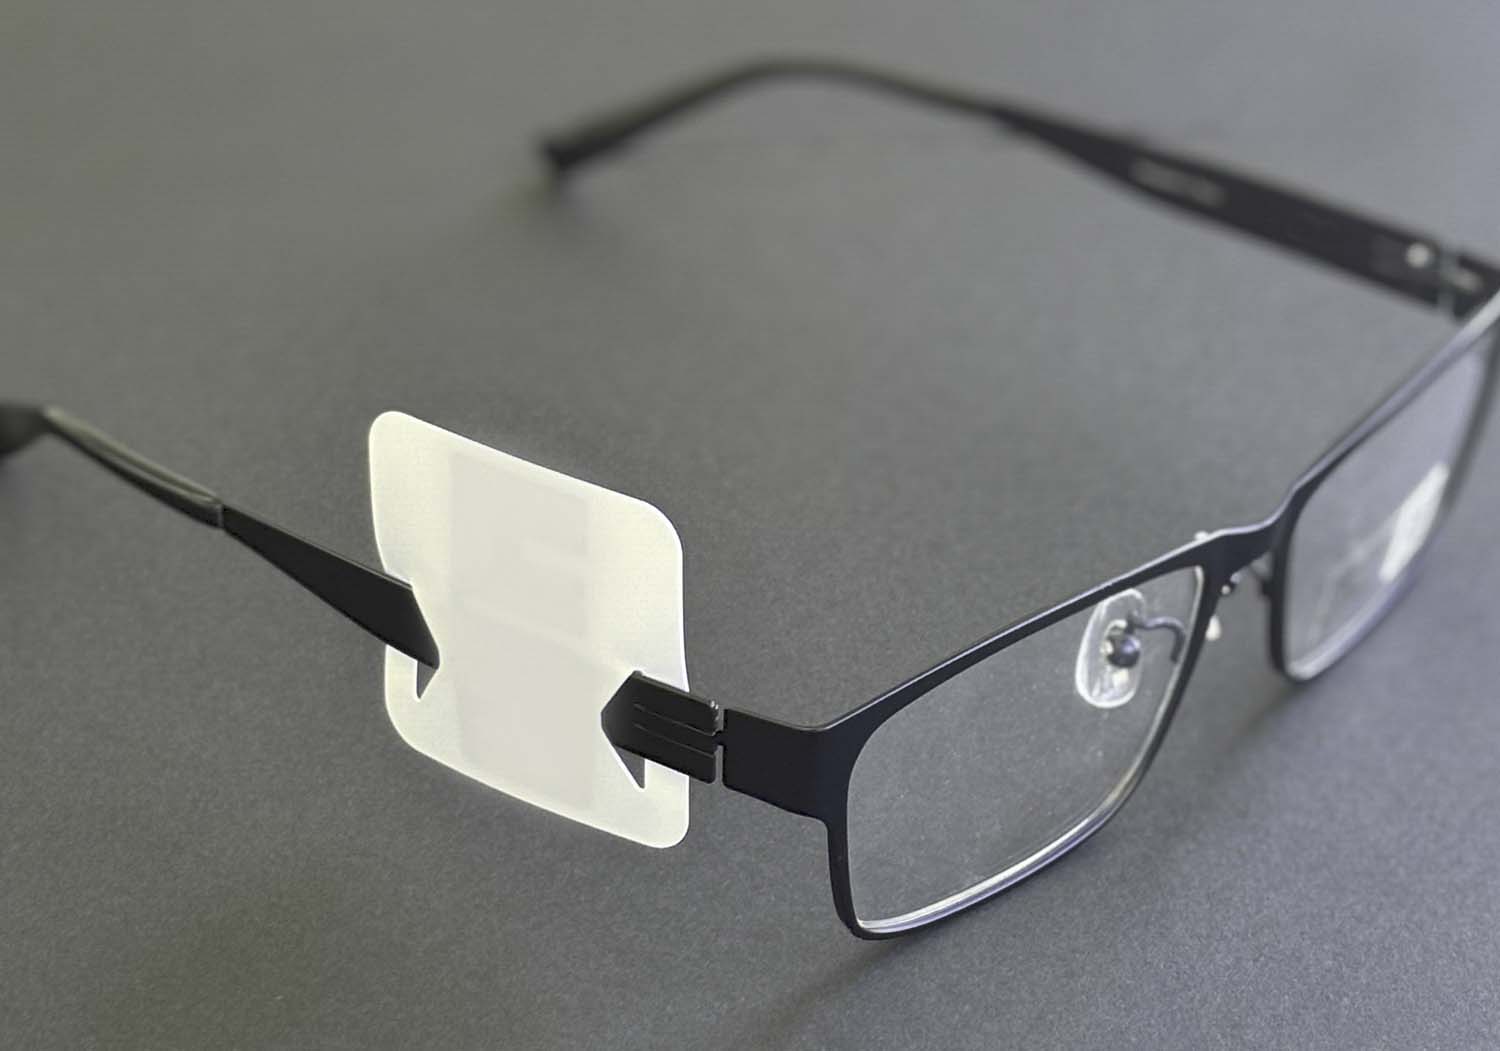 Patent registration for RFID tags for eyeglasses has been completed.